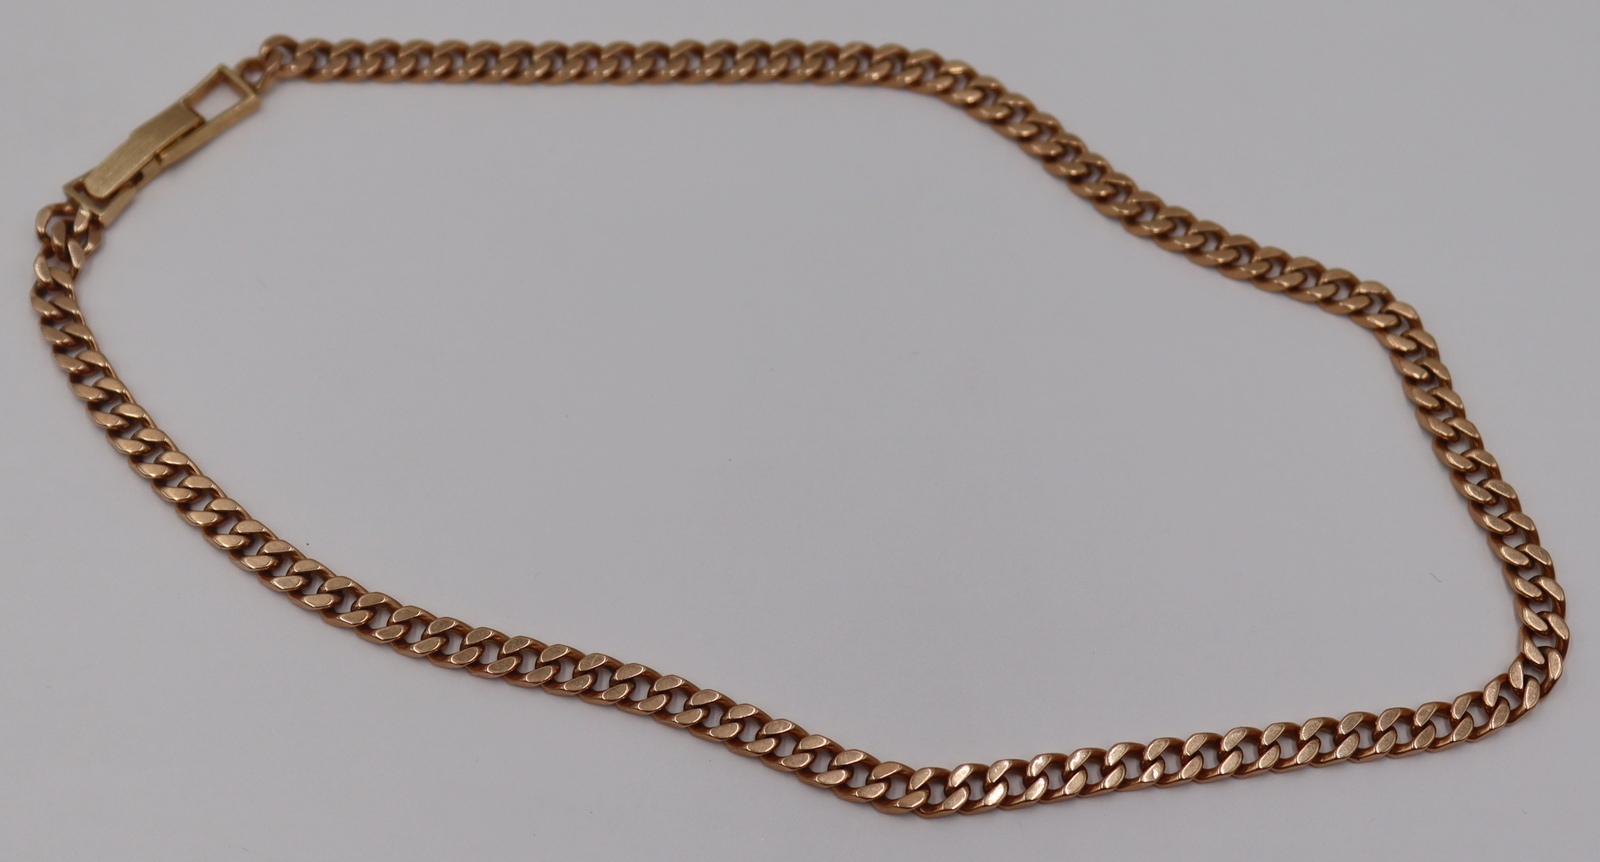 JEWELRY 14KT ROSE GOLD CUBAN LINK 3bcc47